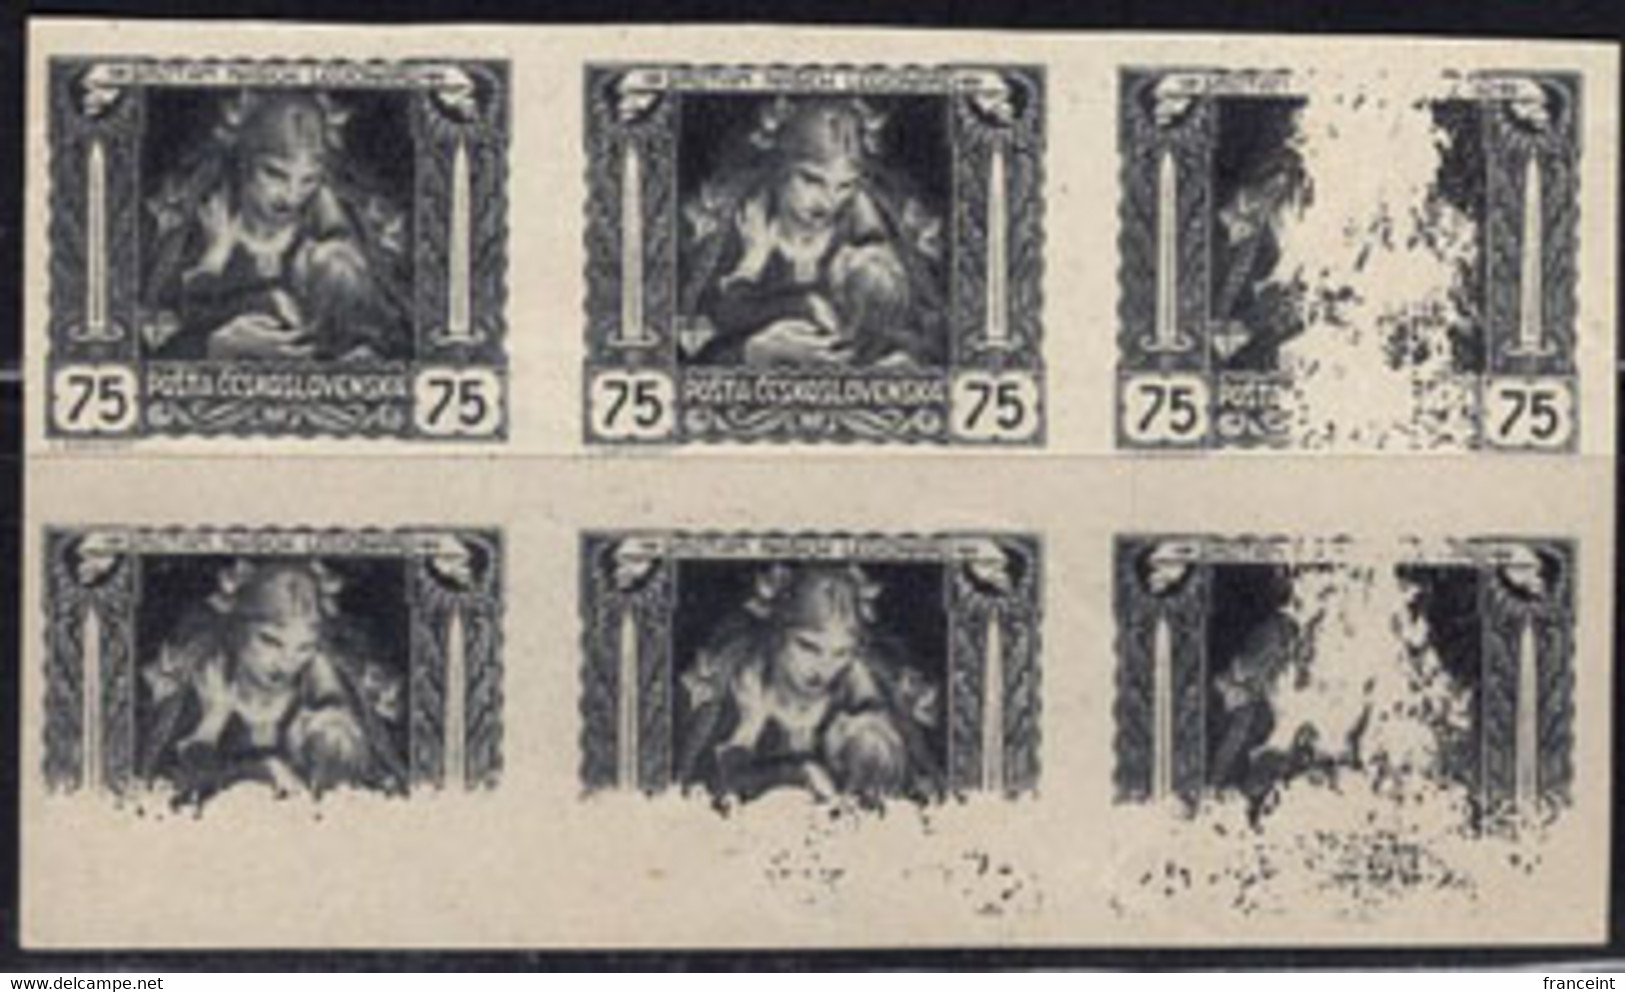 CZECHOSLOVAKIA(1919) Mother And Child. Block Of 6 Imperforate Proofs Printed On White Paper. Scott No B127. - Ensayos & Reimpresiones